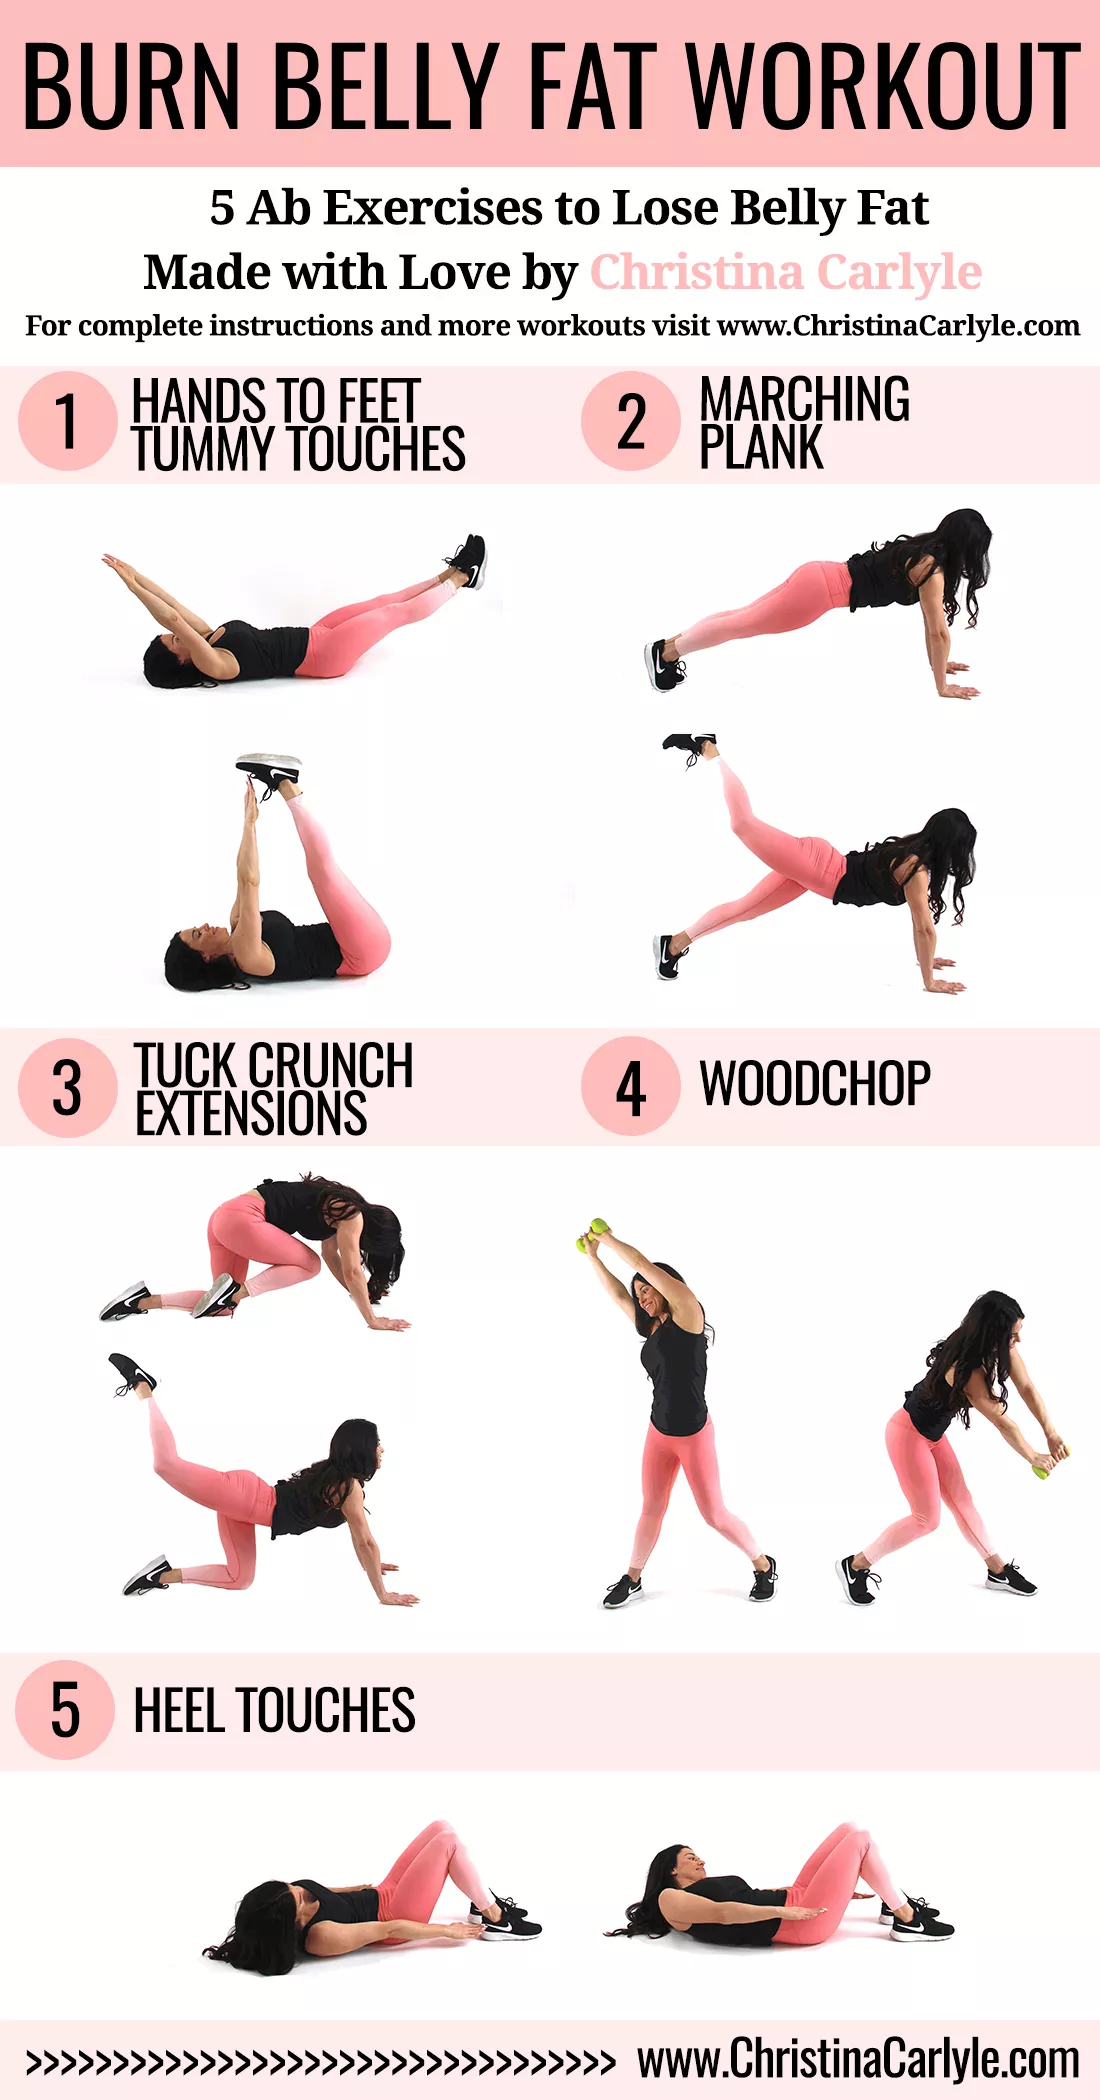 5 ab exercises to lose belly fat | Christina Carlyle